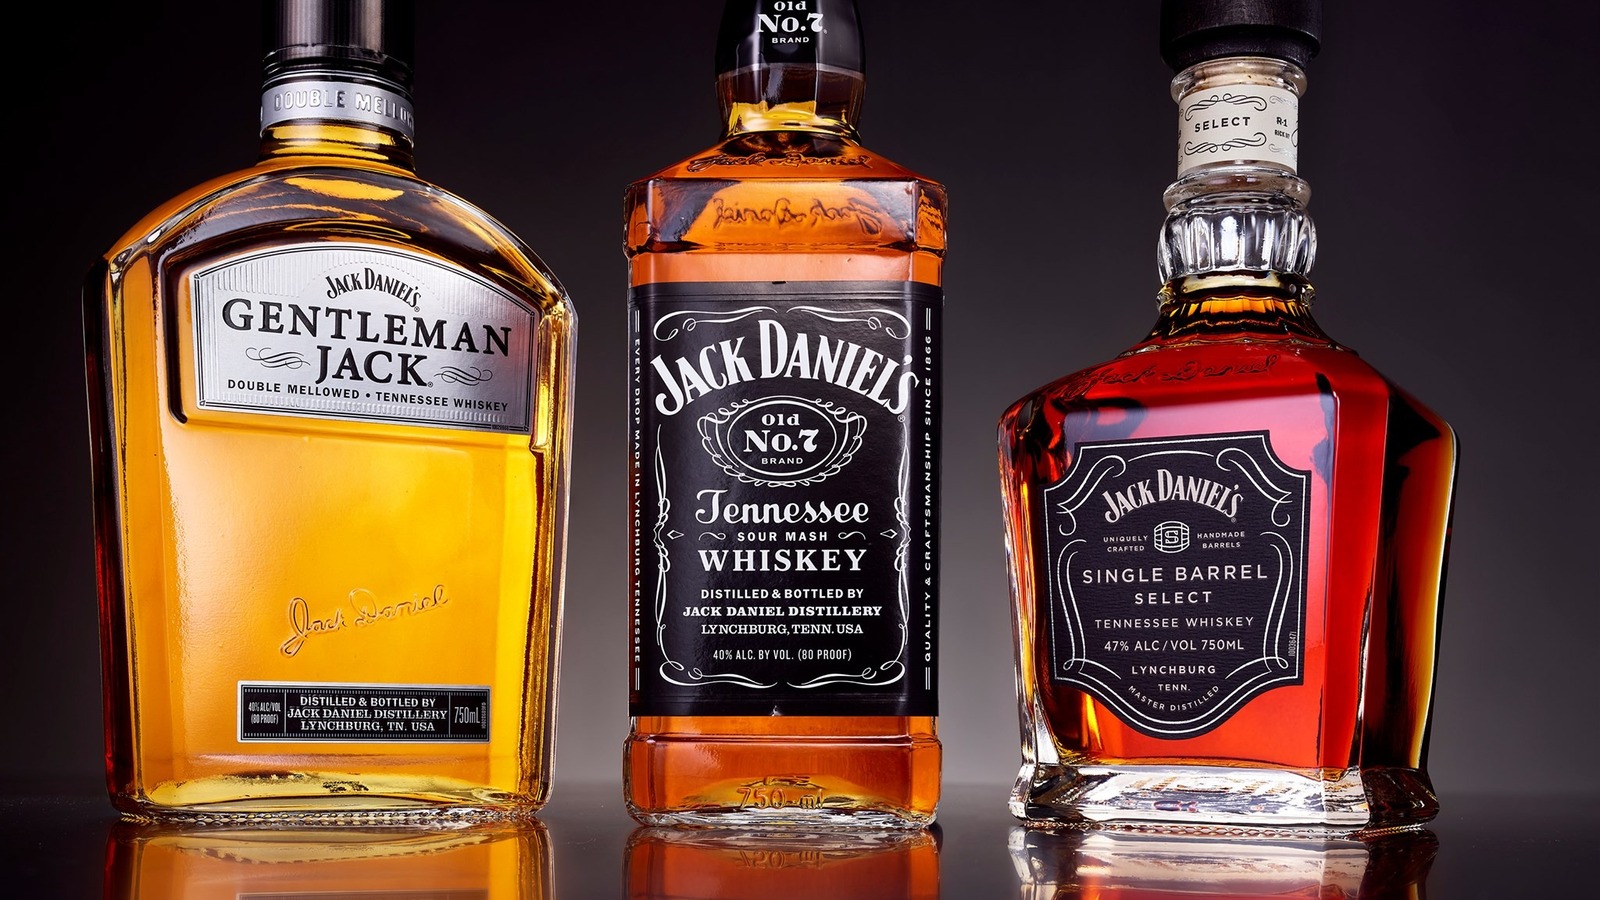 https://www.foodrepublic.com/img/gallery/15-jack-daniels-gift-sets-to-warm-whiskey-lovers-through-the-holidays/l-intro-1699897204.jpg